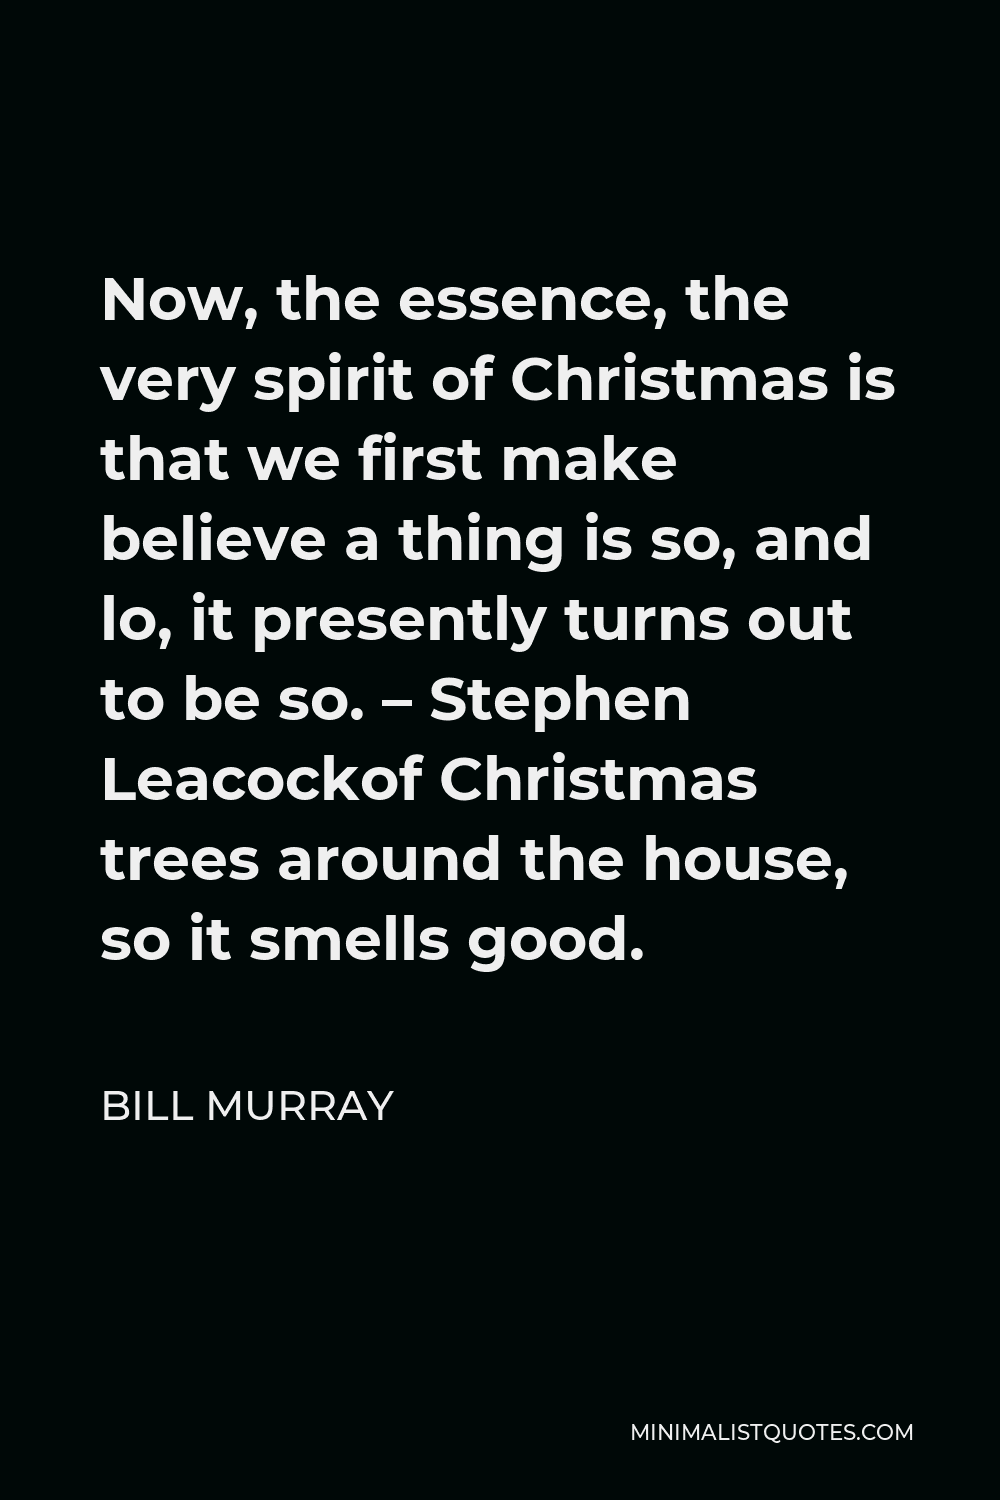 Bill Murray Quote - Now, the essence, the very spirit of Christmas is that we first make believe a thing is so, and lo, it presently turns out to be so. – Stephen Leacockof Christmas trees around the house, so it smells good.